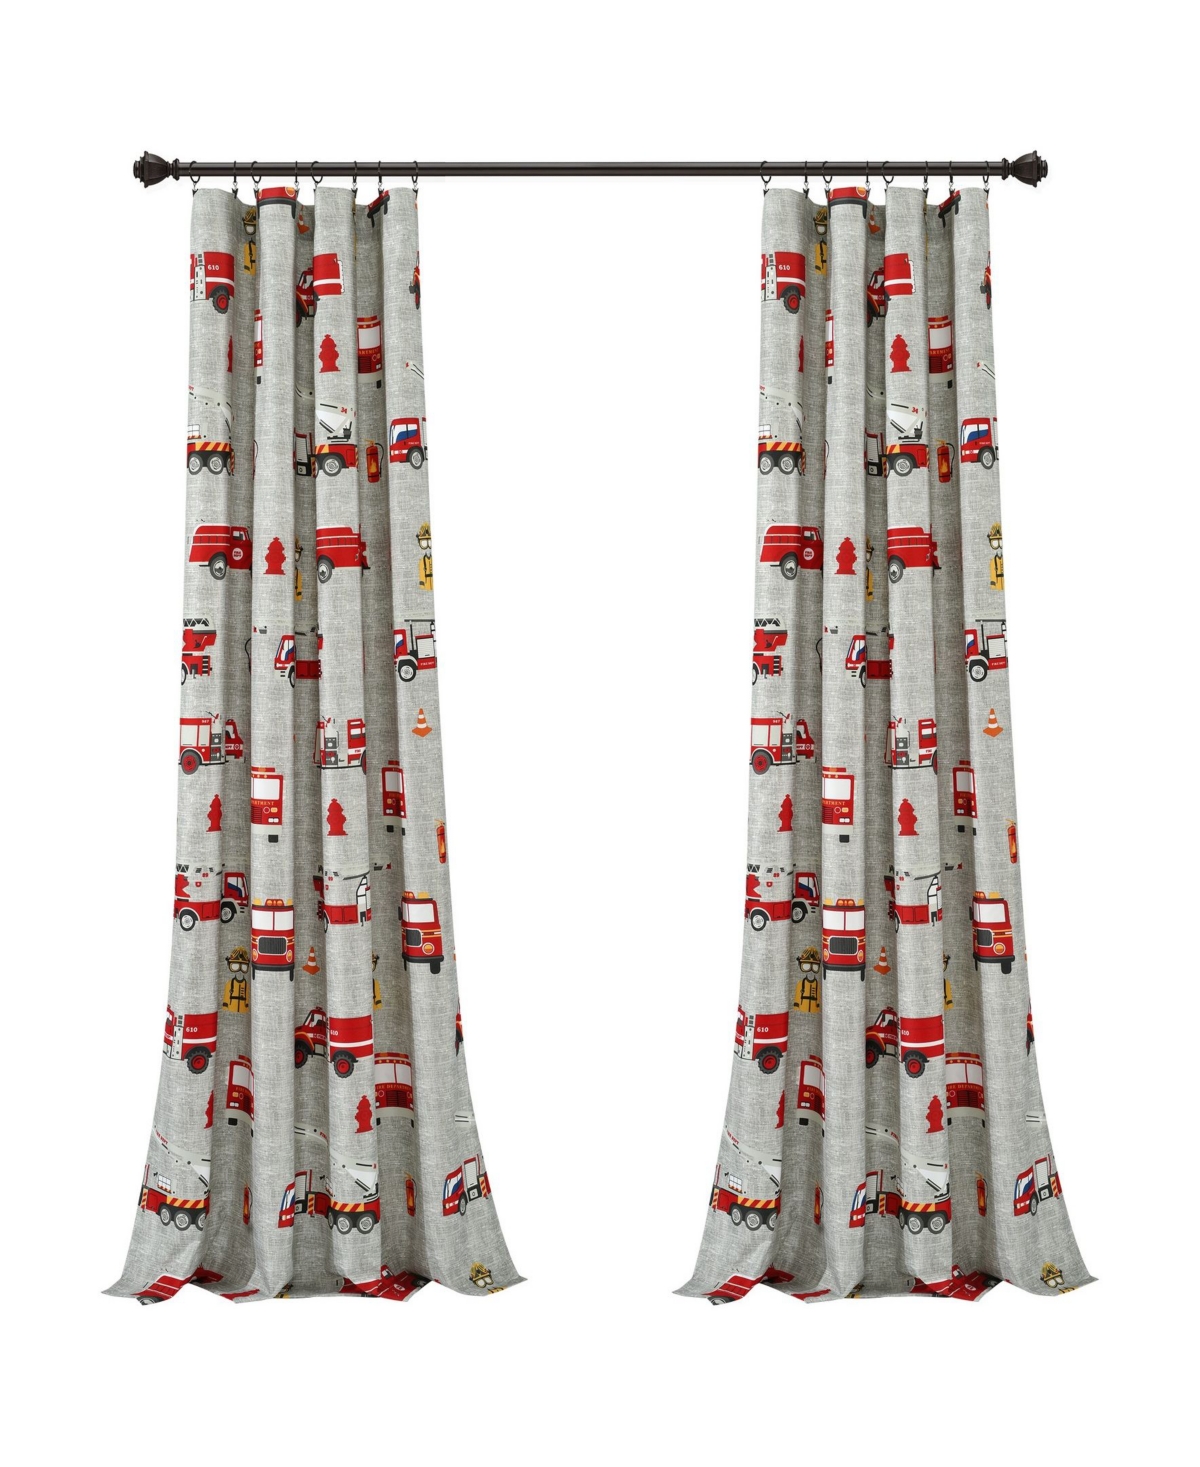 Lush Decor Fire Truck Window Curtain Panels Set For Kids, 84" X 52" In Red,gray